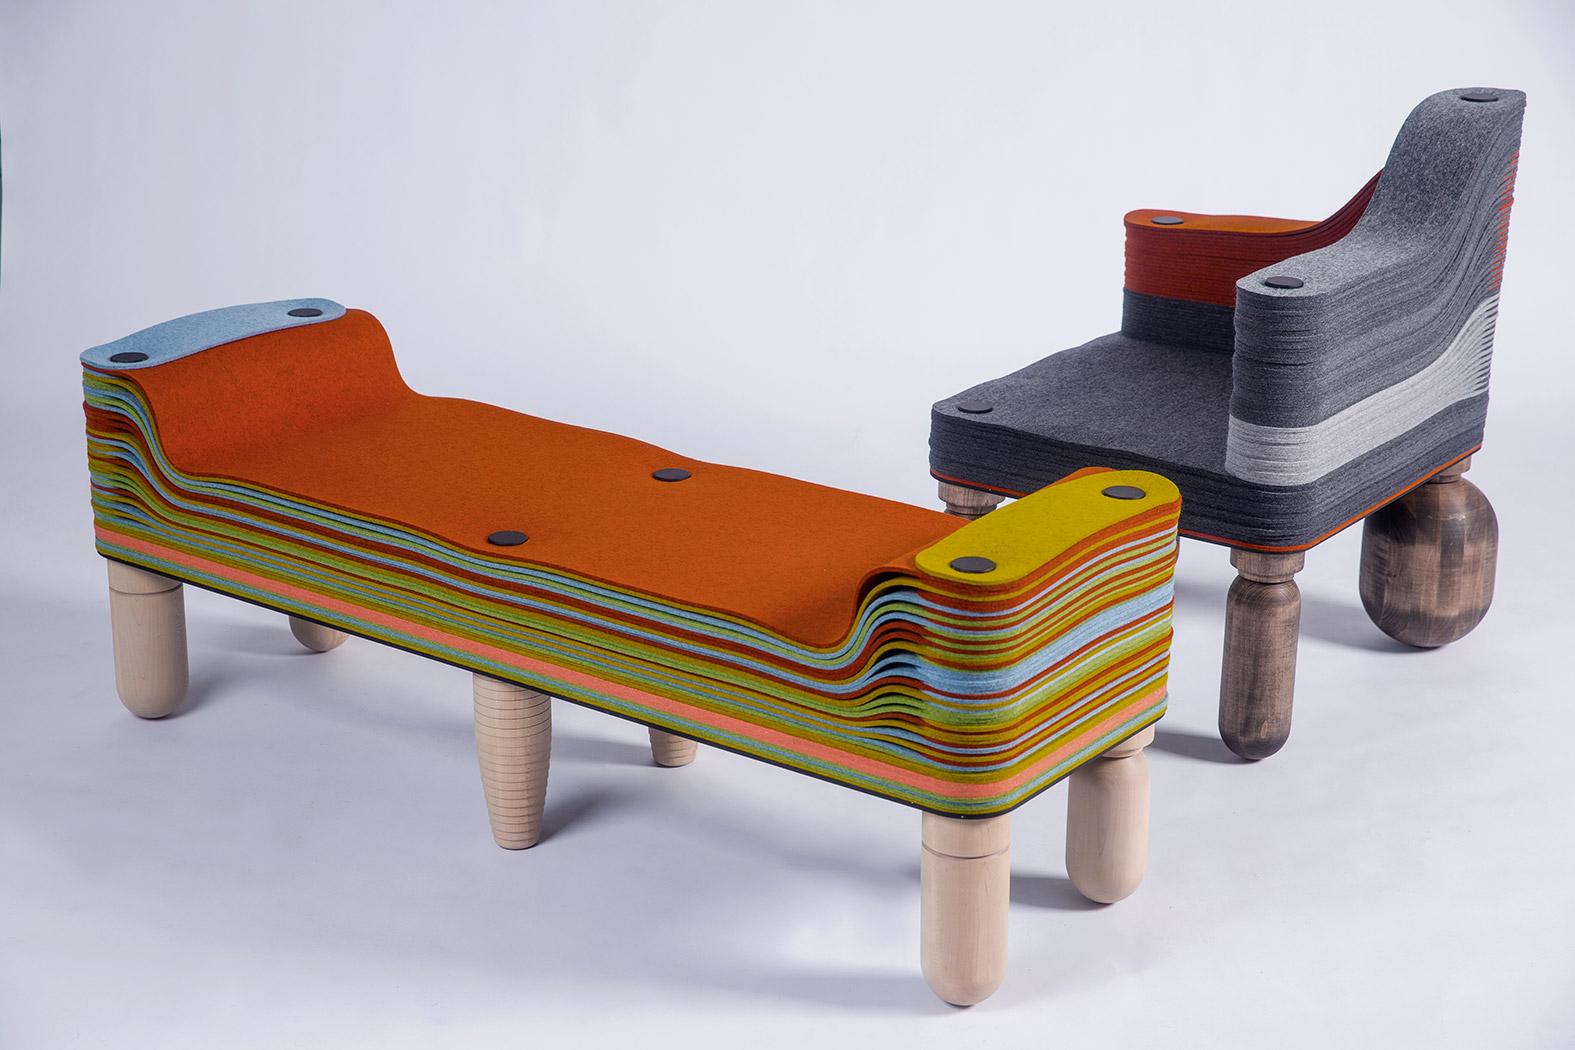 Machine-Made Maxine B, Felt and Wood Bench, Benoist F. Drut in STACKABL, Canada, 2021 For Sale